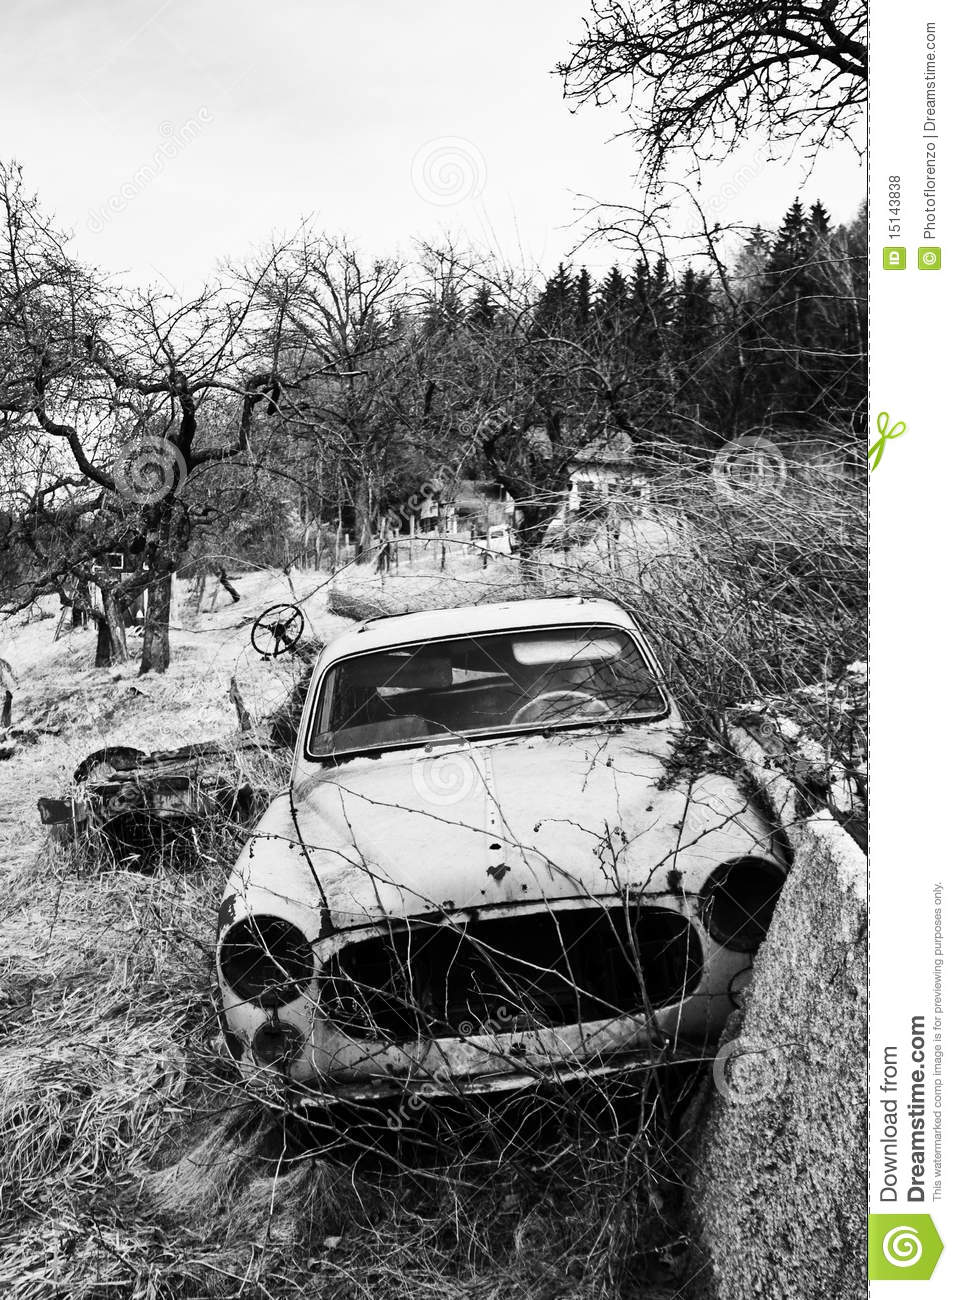 Broken Car In Black And White Royalty Free Stock Photos   Image